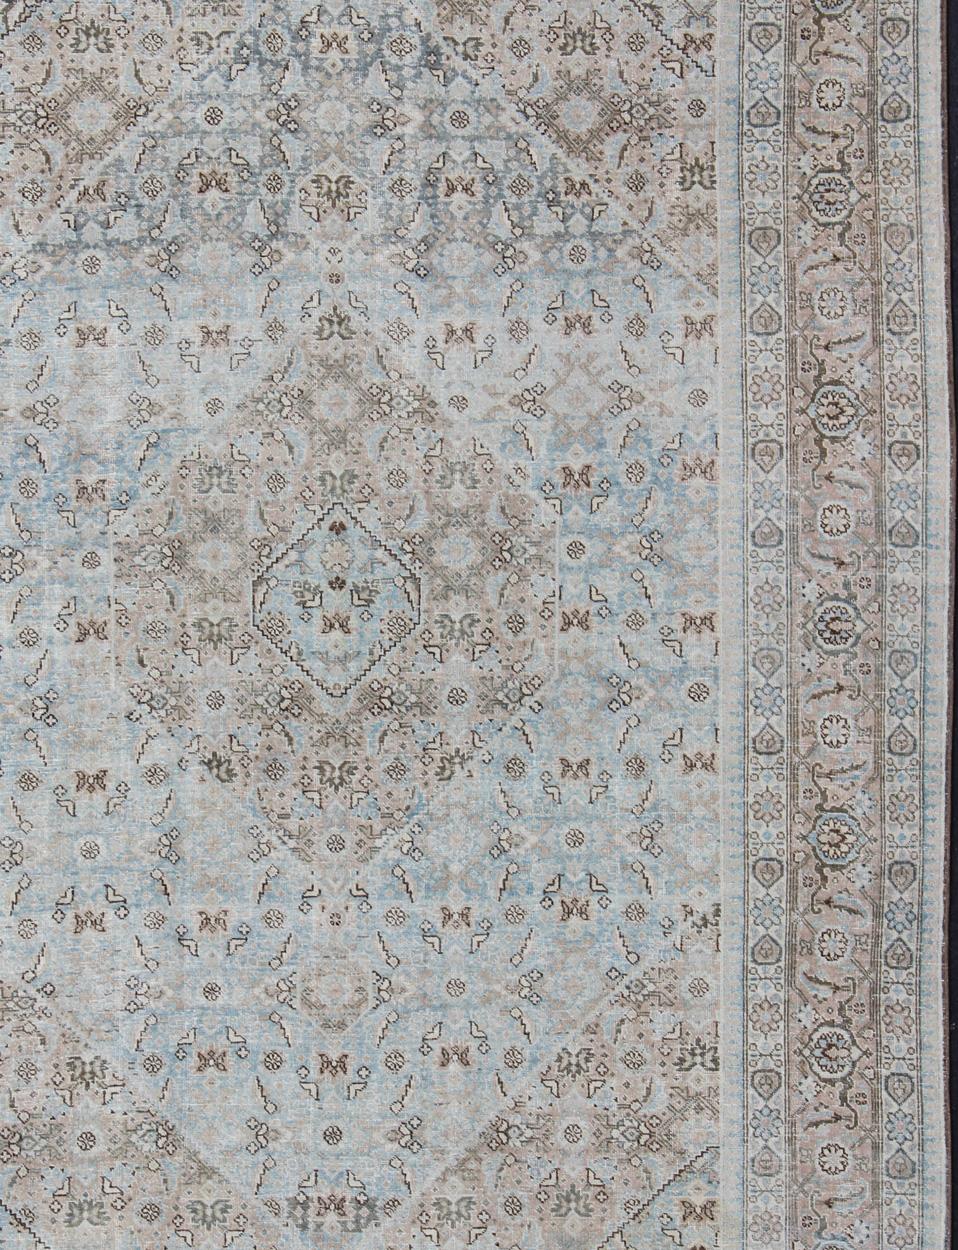 Light Blue and Taupe Diamond Medallion Geometric Design Tabriz Rug from Persia, Keivan Woven Arts / rug SUS-1908-23, country of origin / type: Iran / Tabriz, circa 1920

This antique Tabriz carpet from 1920s Persia features a central field hosting a